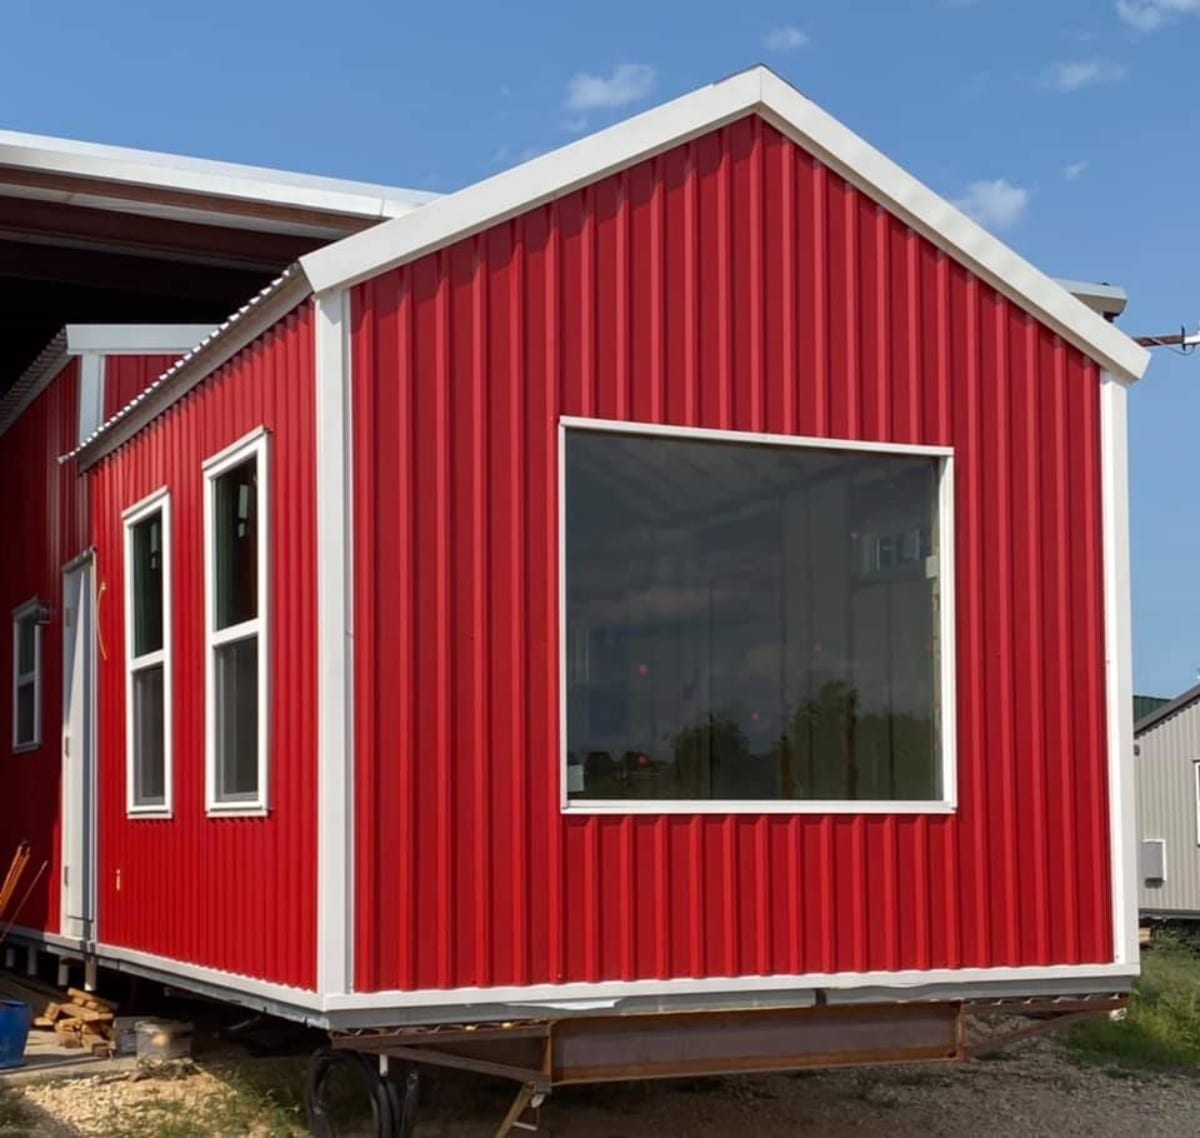 Gorgeous 40' Tiny House with red color exterior from outside